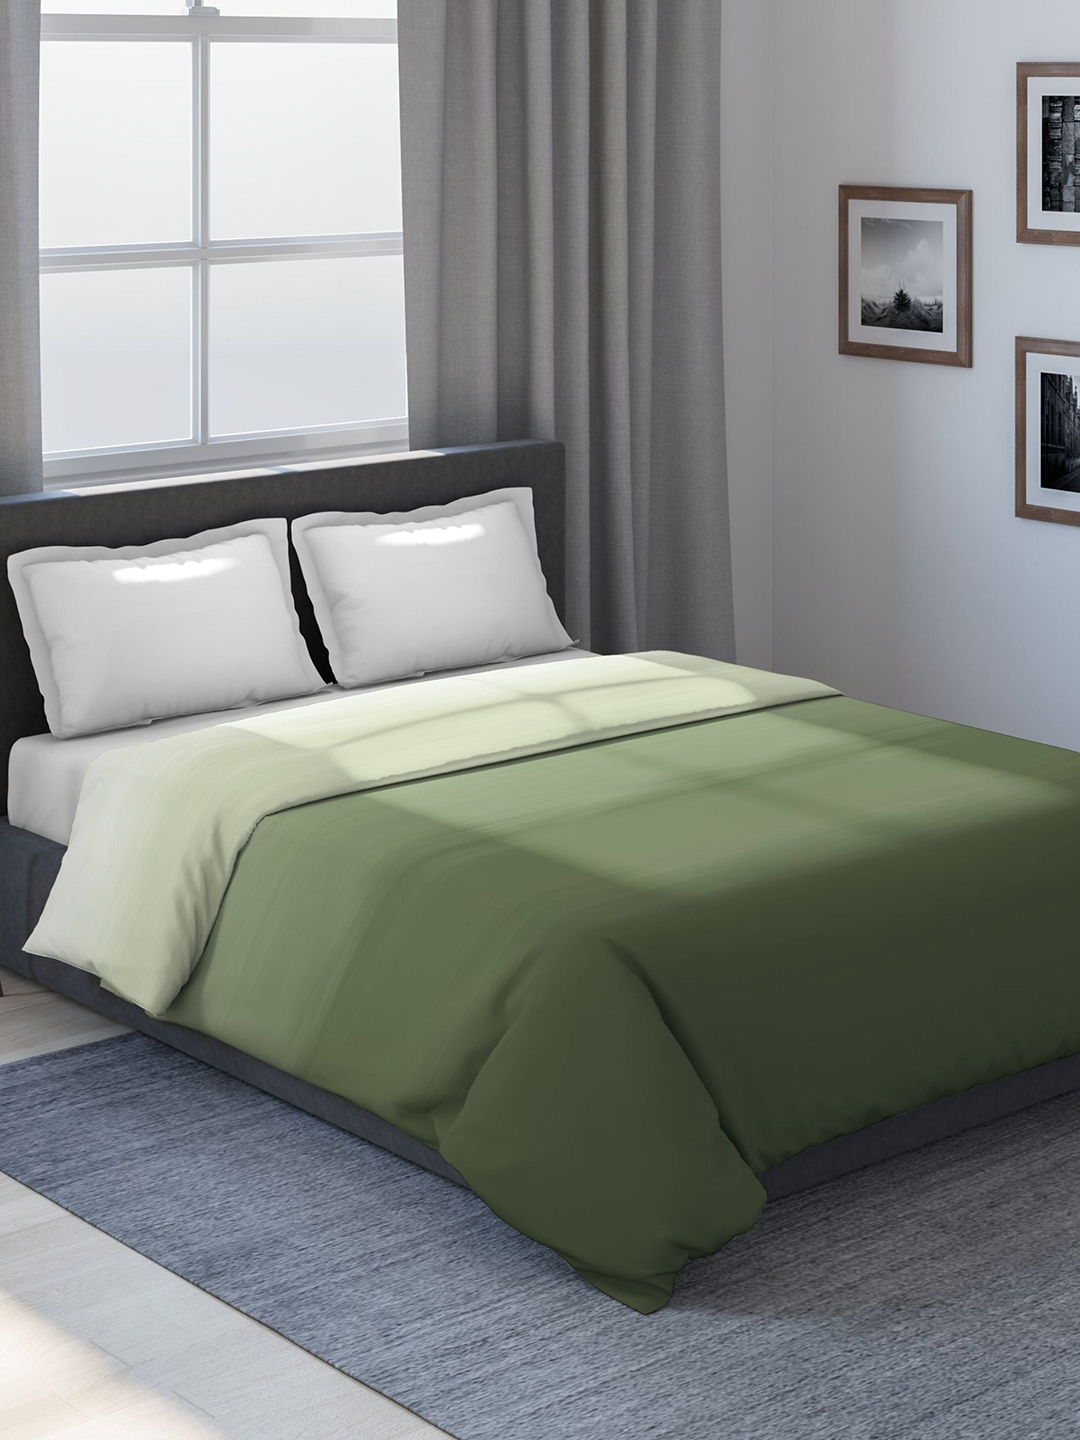 DDecor Green & Grey Solid Mild Winter 150 GSM Double Bed Comforter